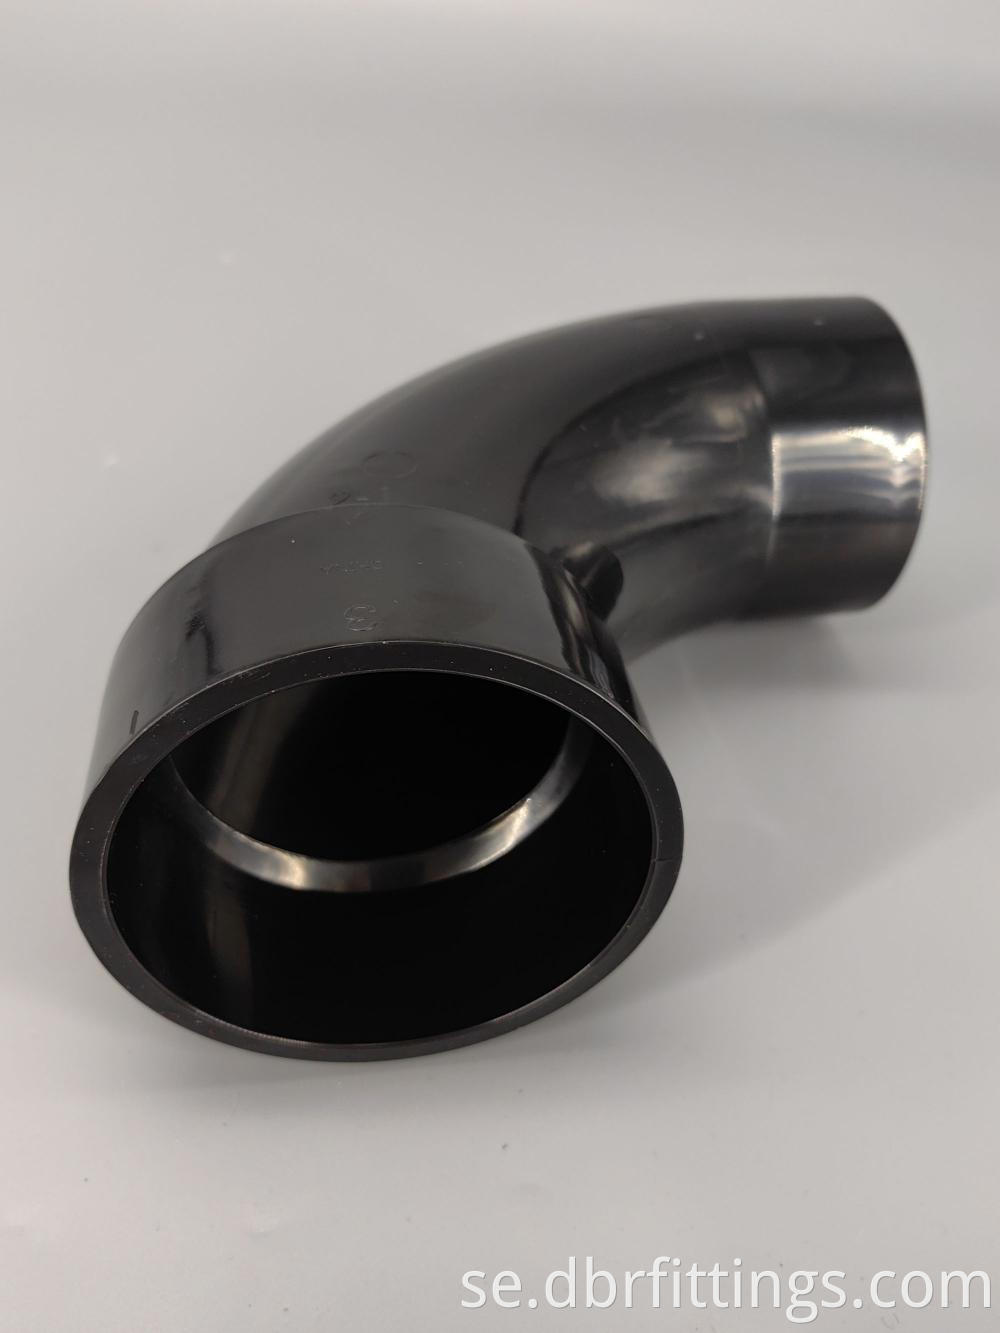 ABS fitting 90°EXTRA LONG TURN STREET ELBOW